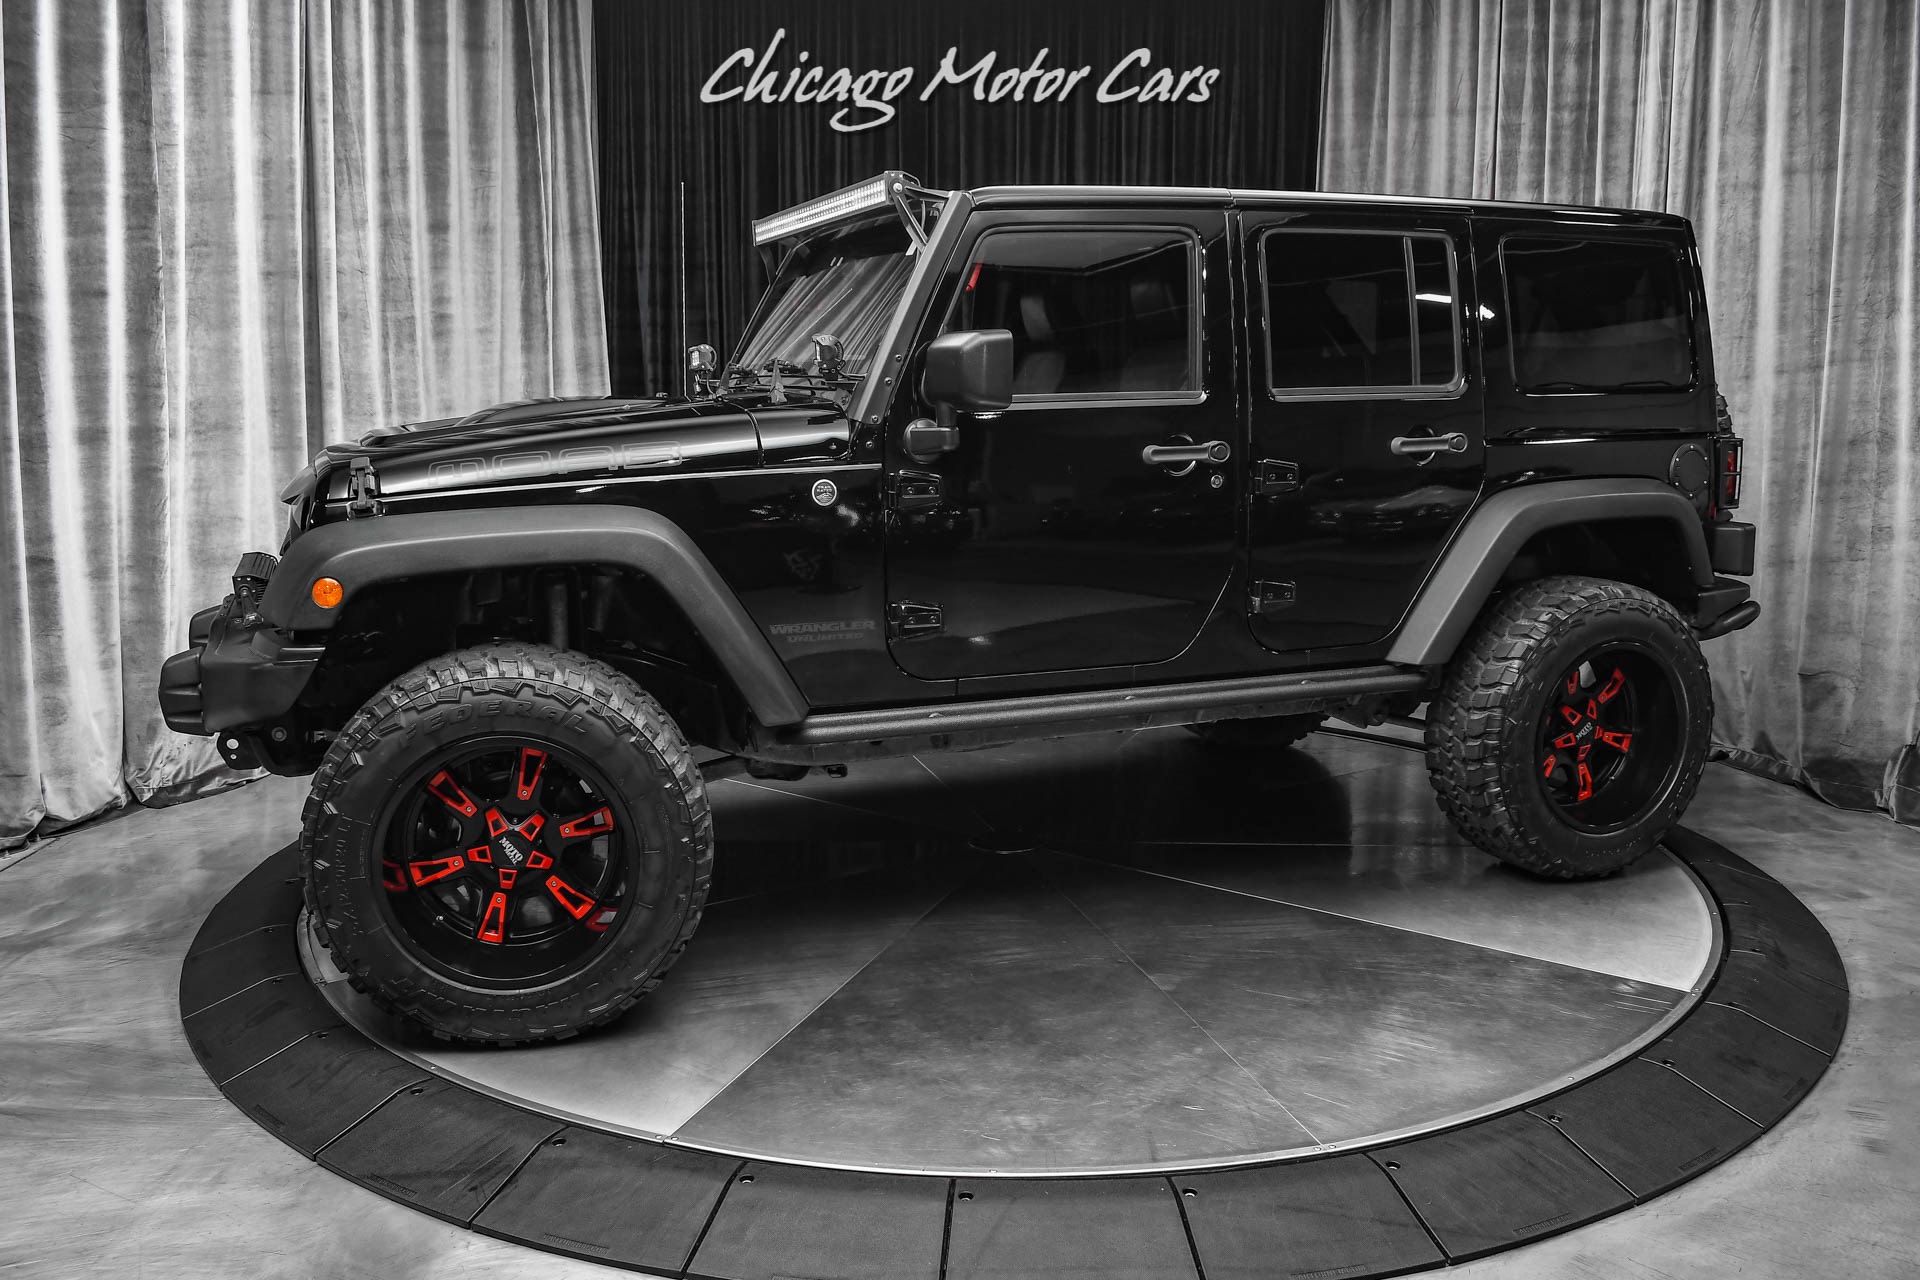 Used-2013-Jeep-Wrangler-Unlimited-Sahara-Moab-4-inch-Lift-35in-Tires-Hardtop--Bestop-Soft-top-Leather